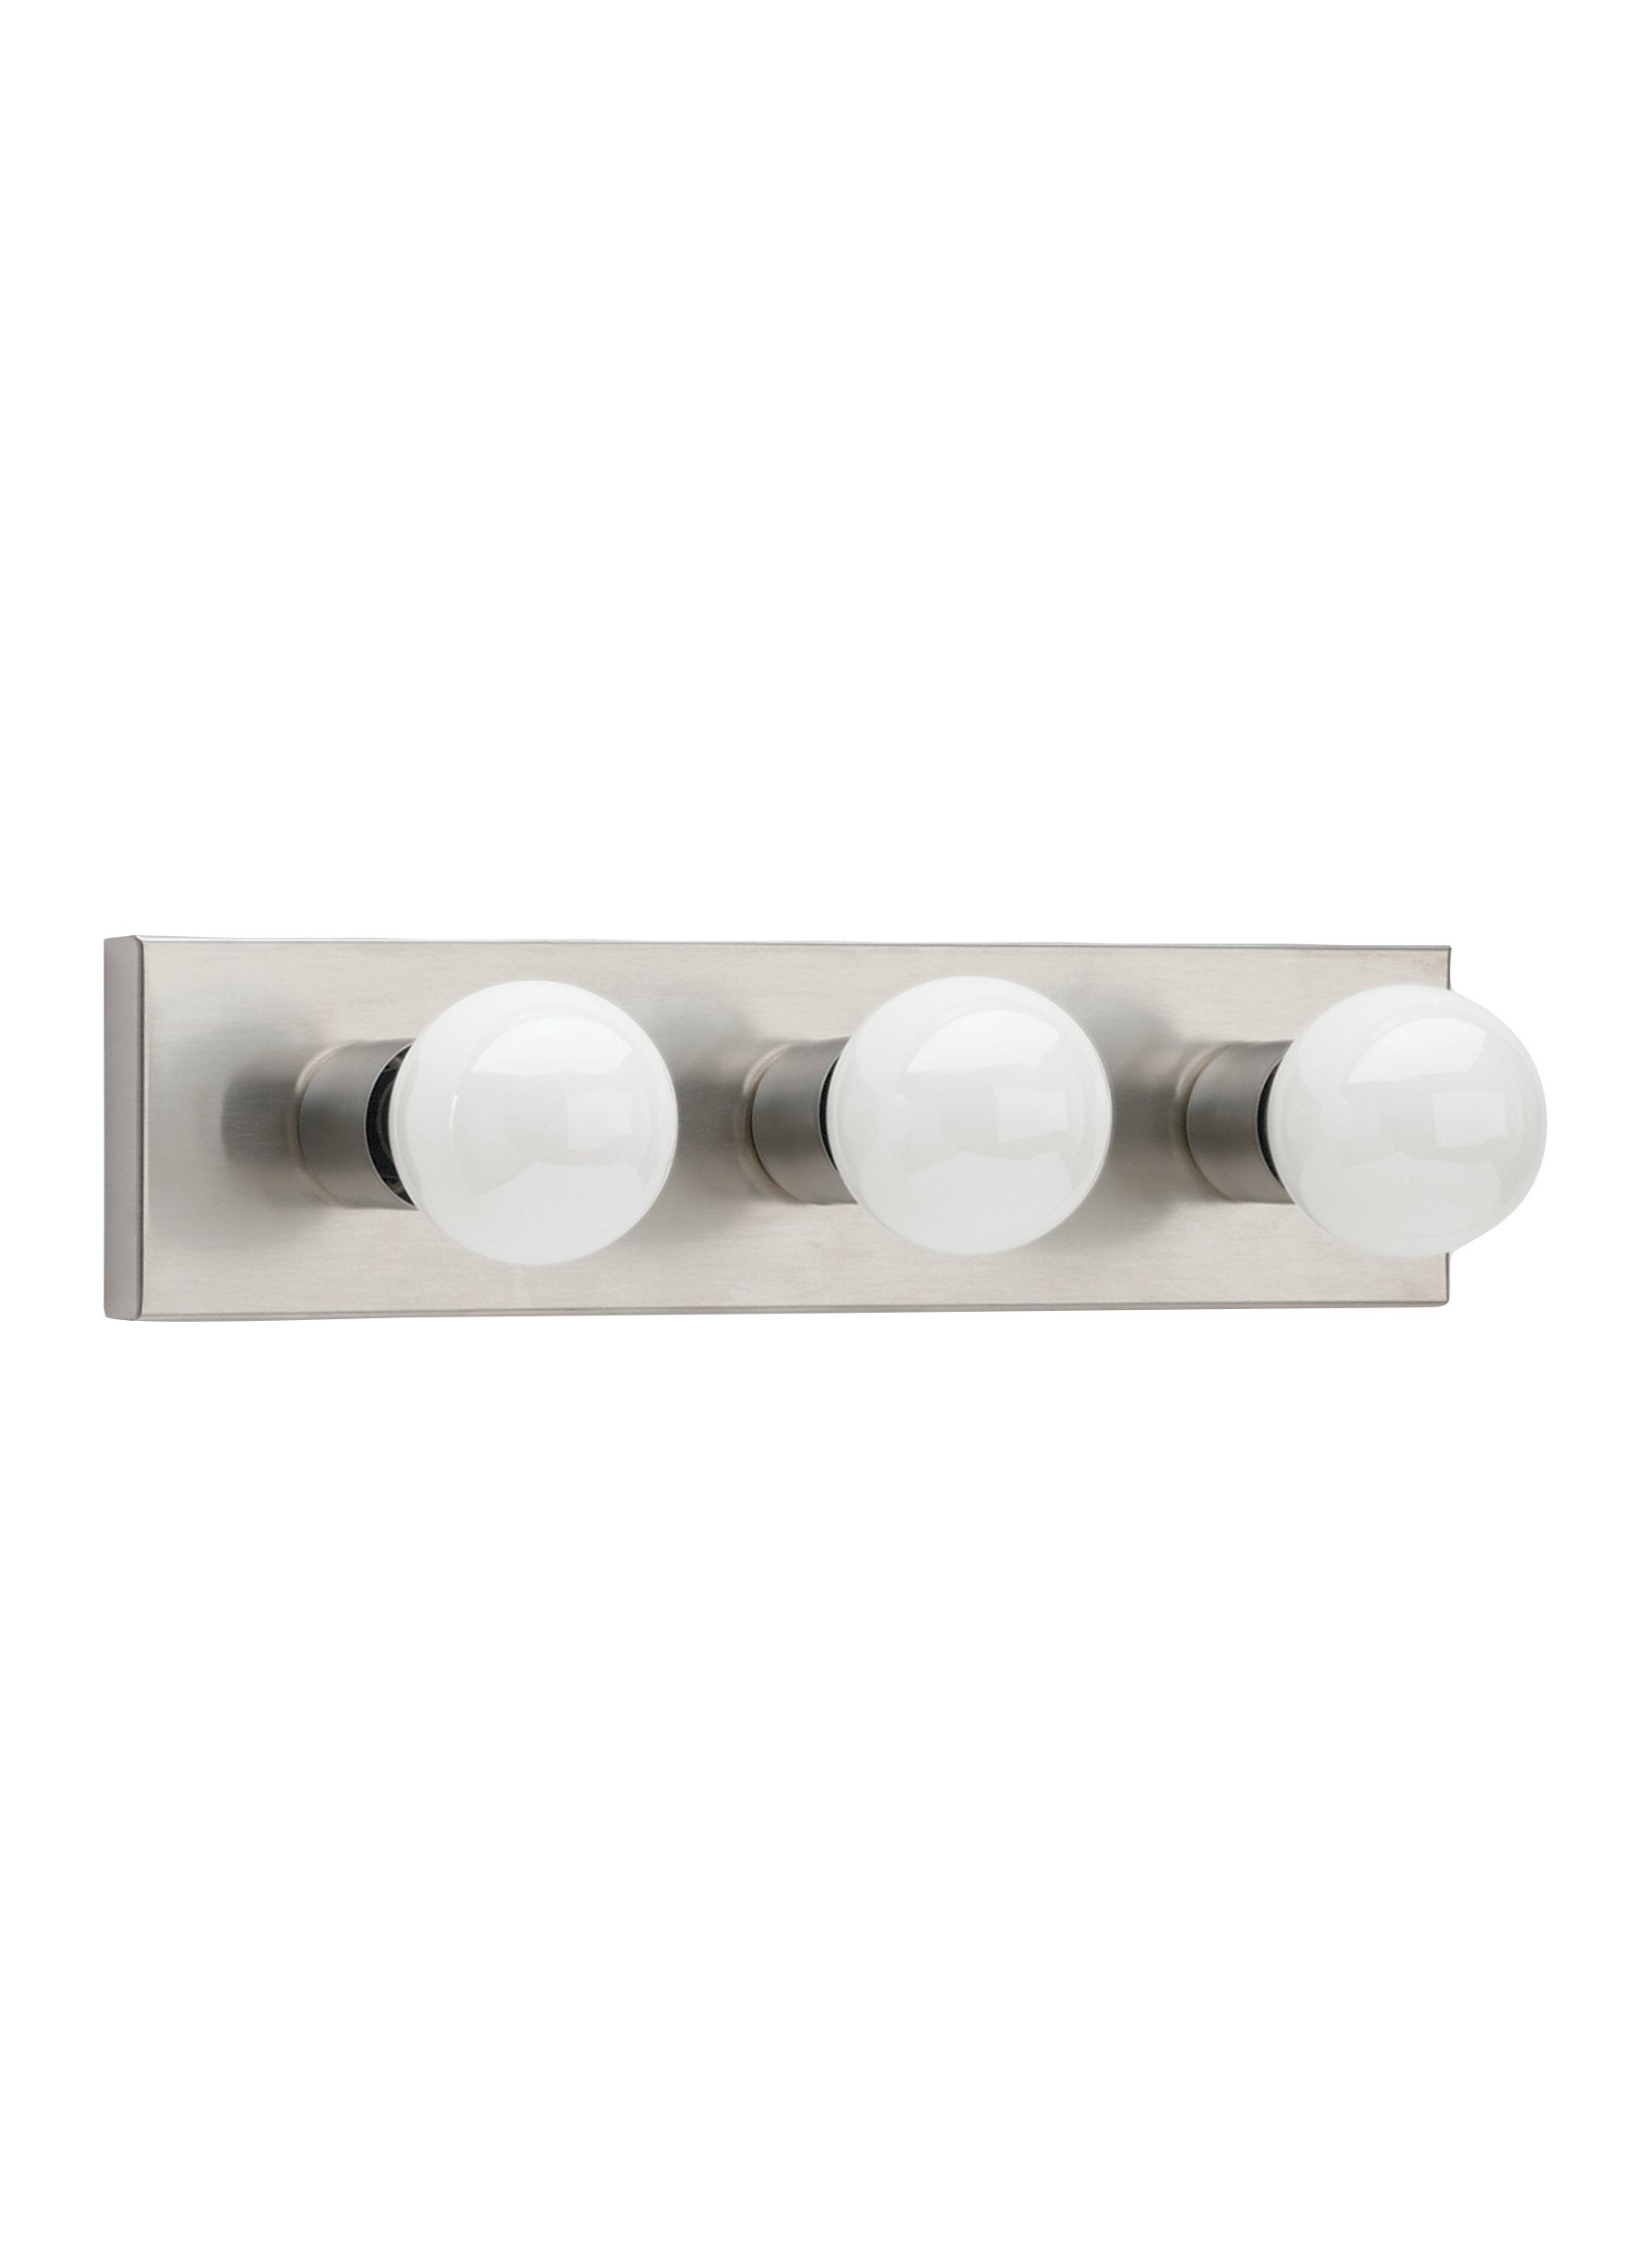 Center Stage Three Light Bath Vanity Fixture - Brushed Stainless Wall Sea Gull Lighting 